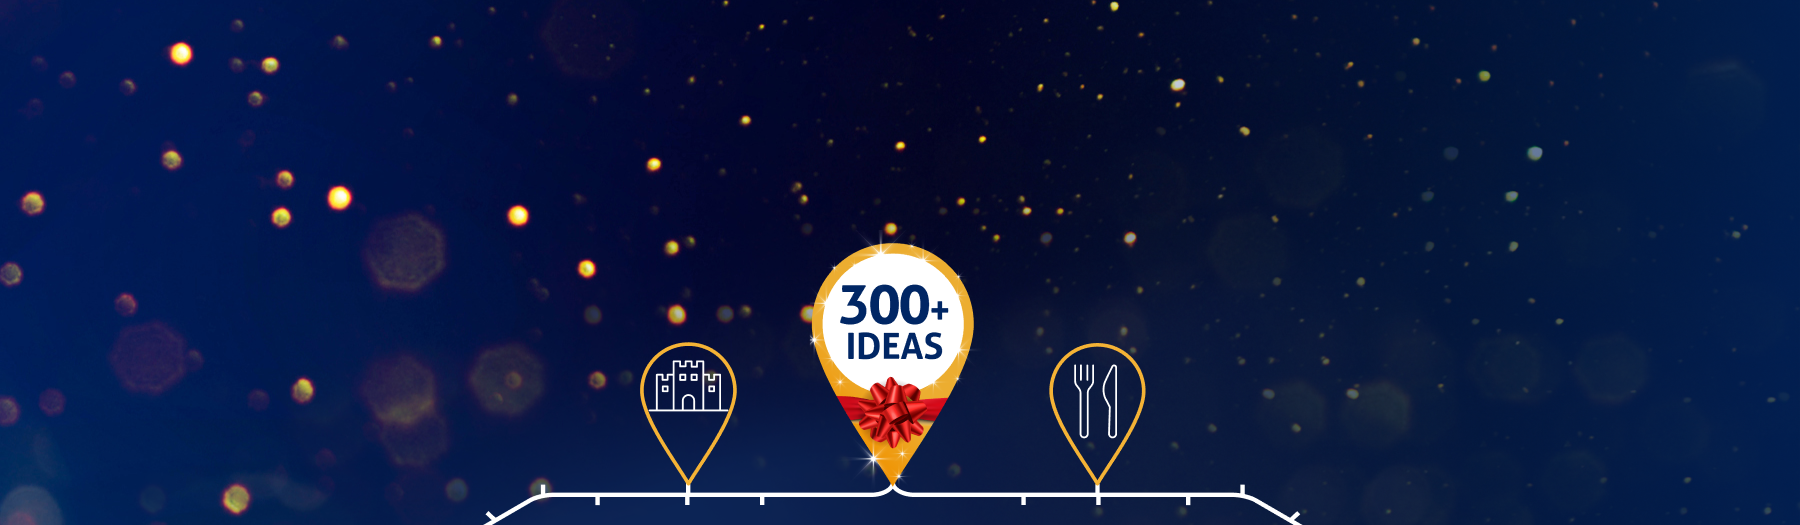 Festive illustration which displays a pin with a red bow on it, which reads 300+ ideas